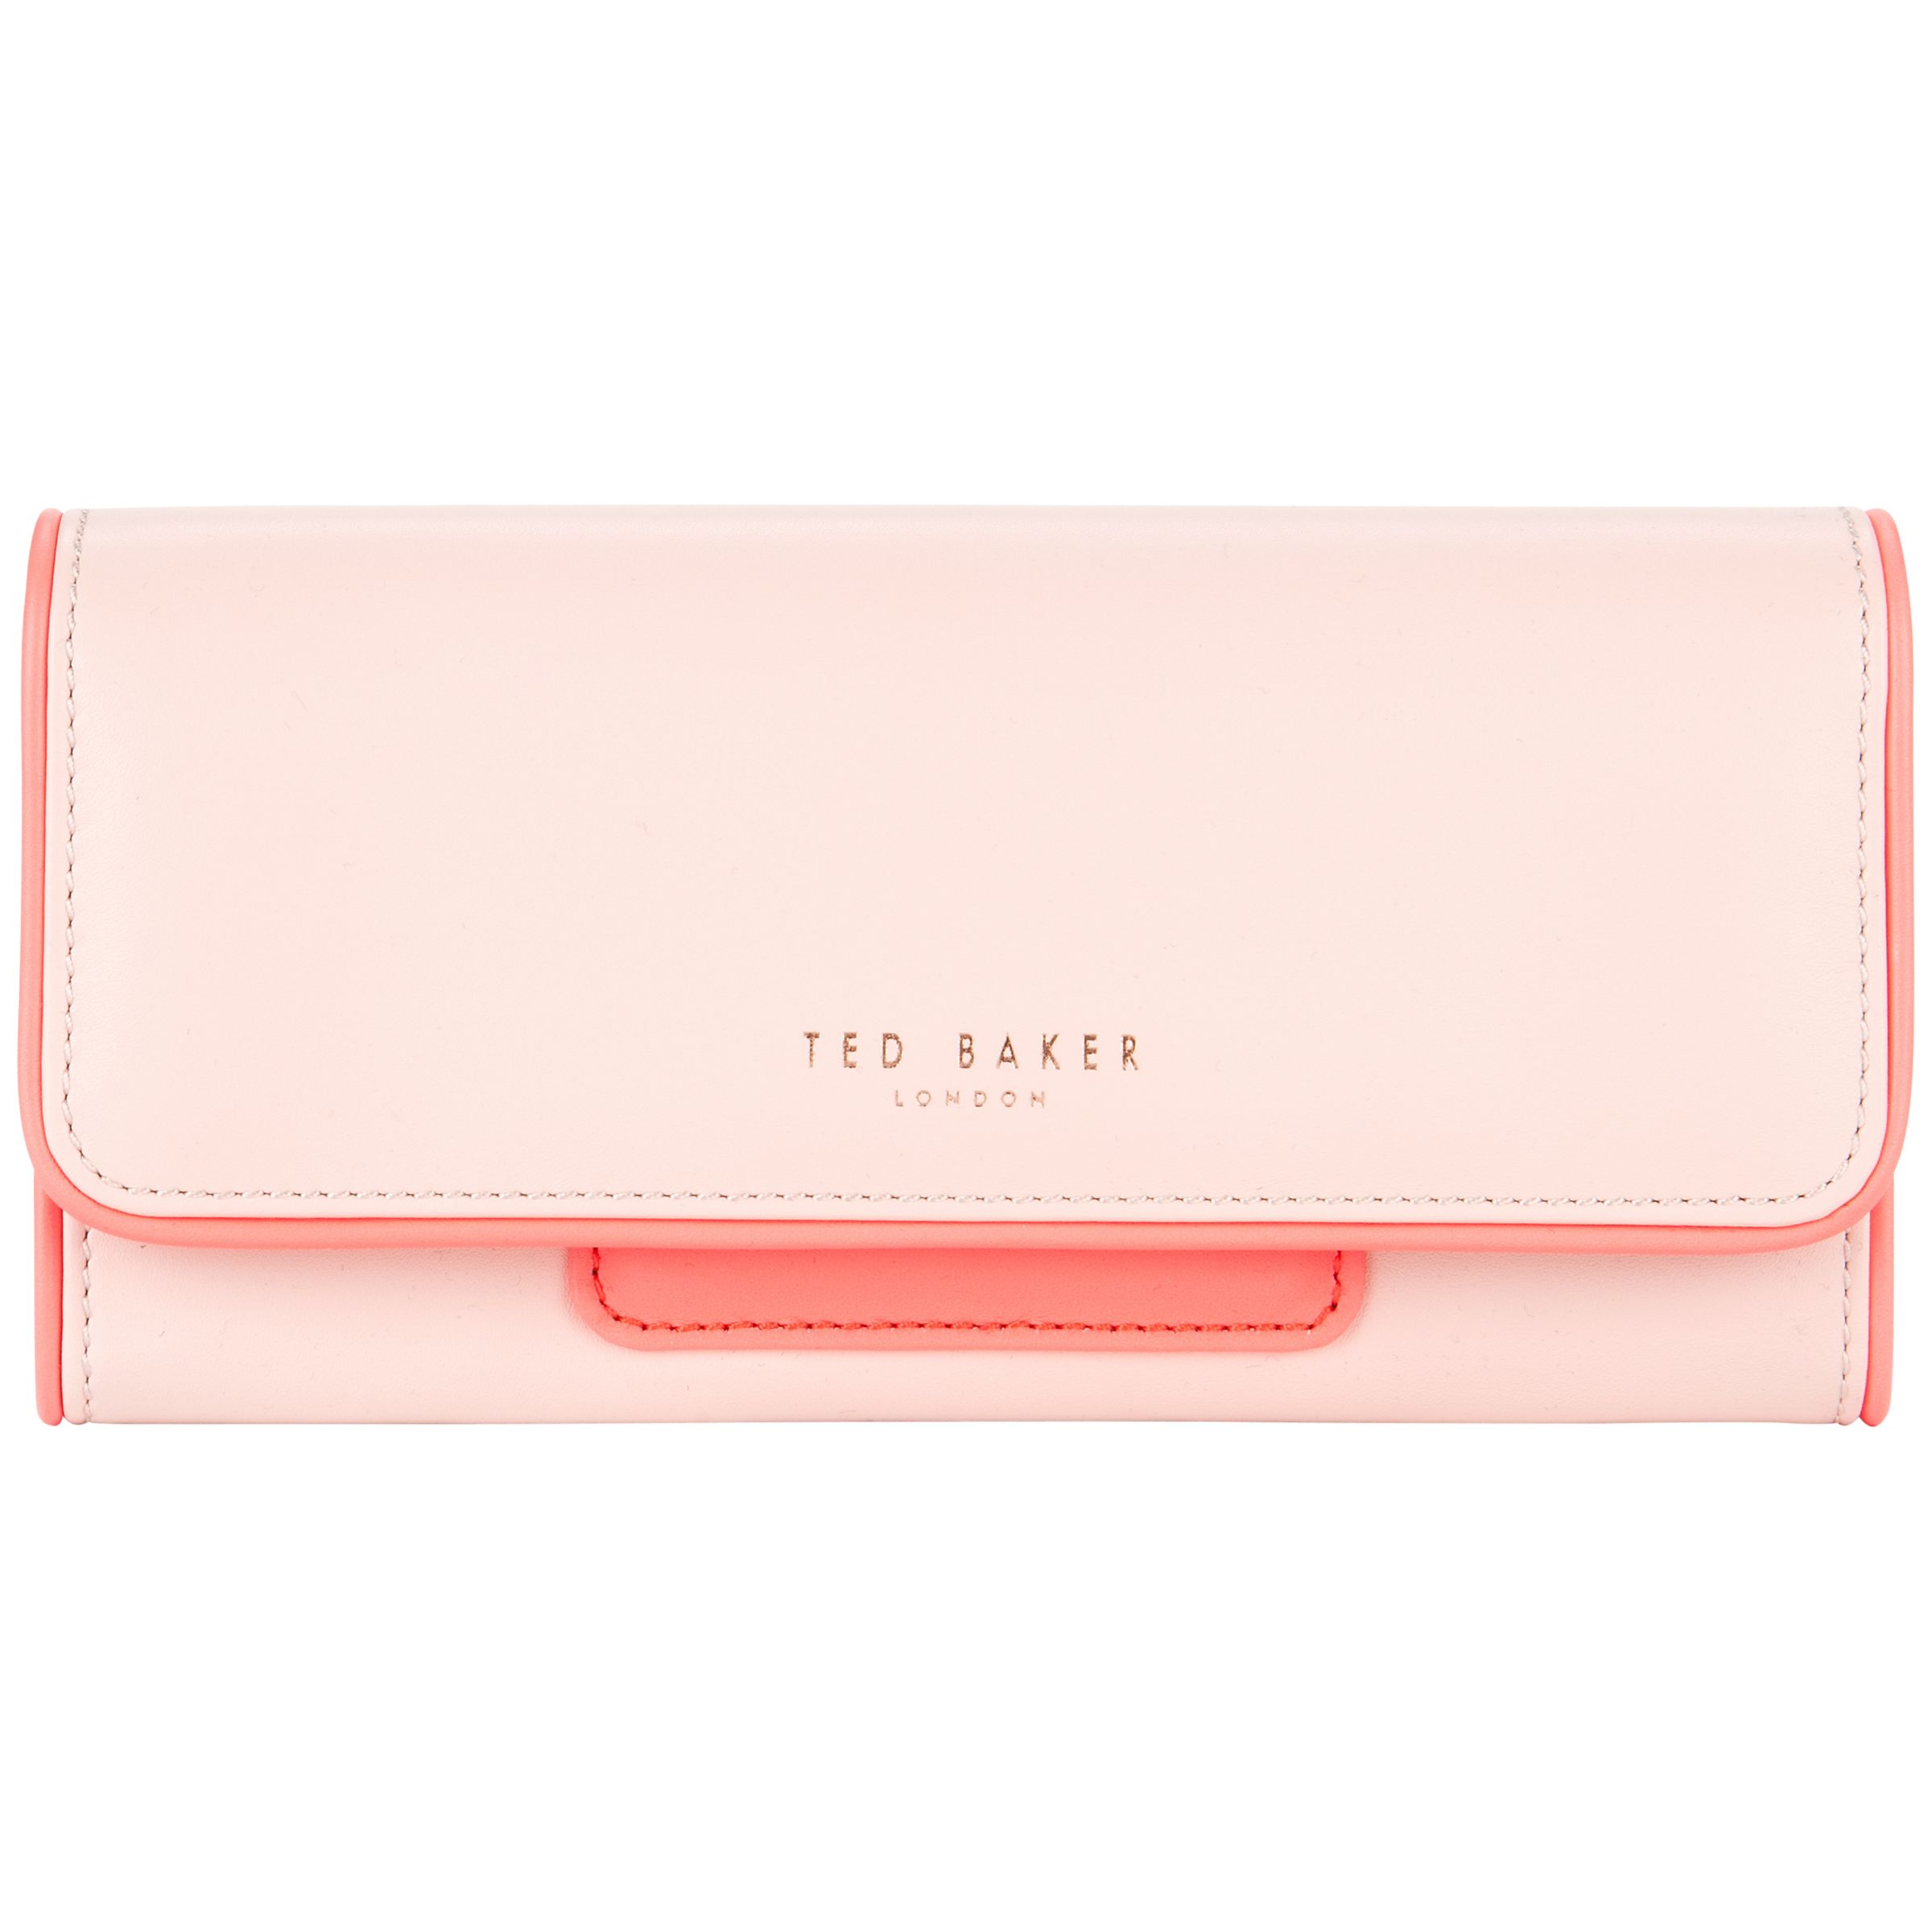 Ted Baker Meekens Leather Mirror Charm Purse, Light Pink